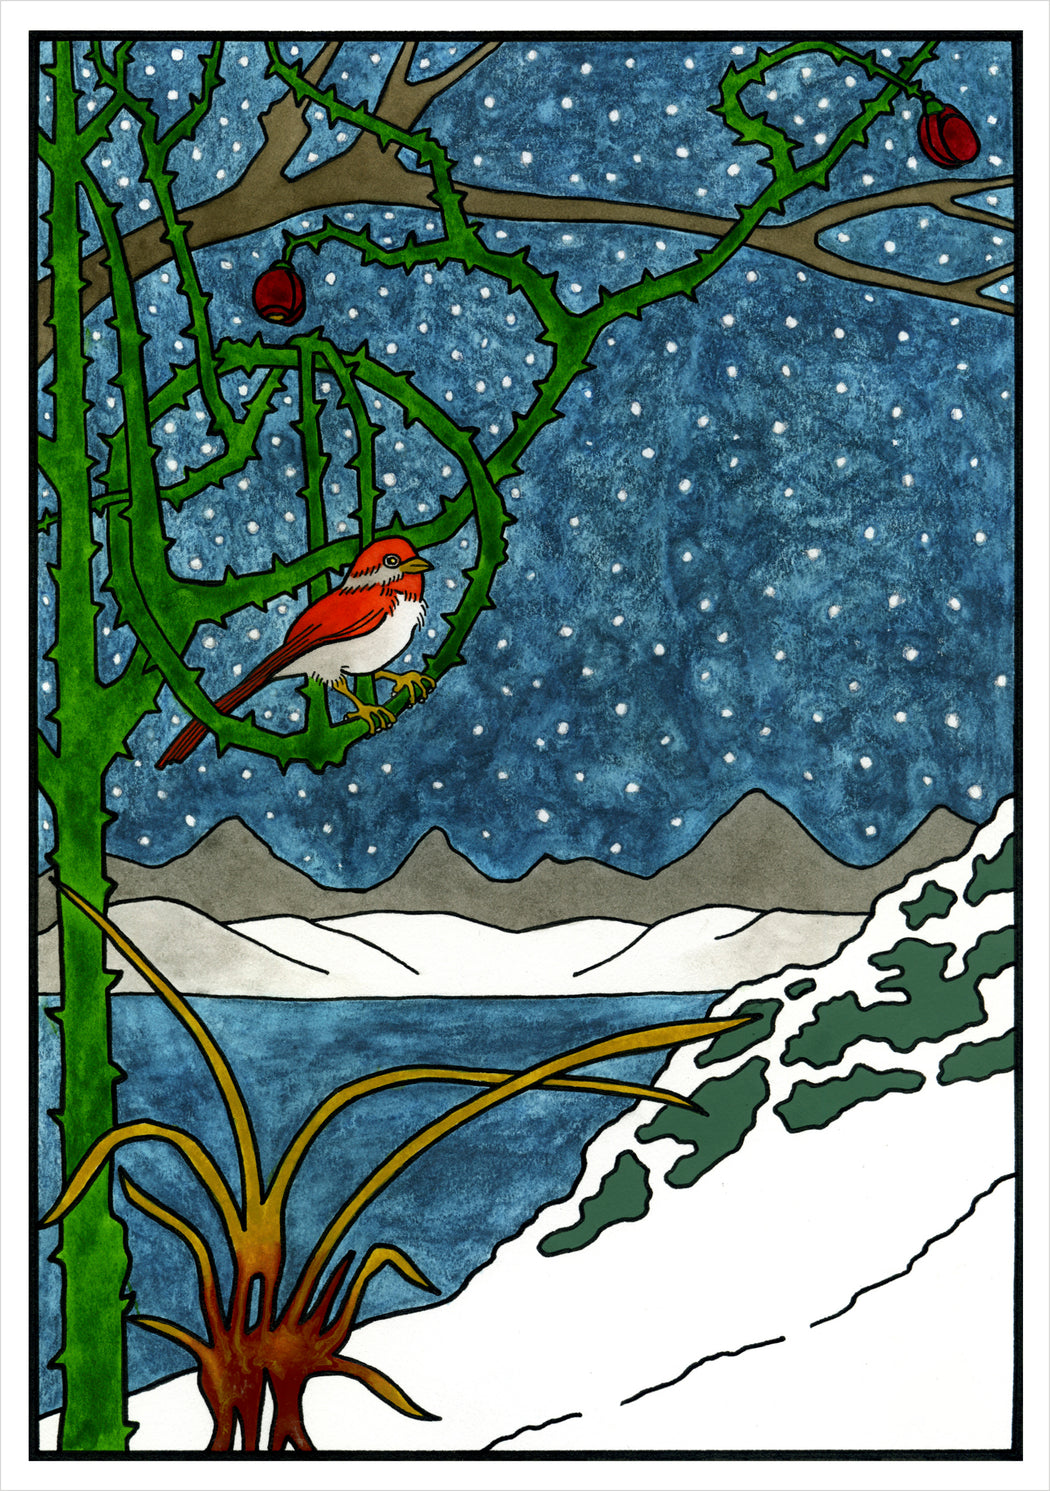 CJ Hurley: The Majesty of Winter Holiday Cards_Interior_1